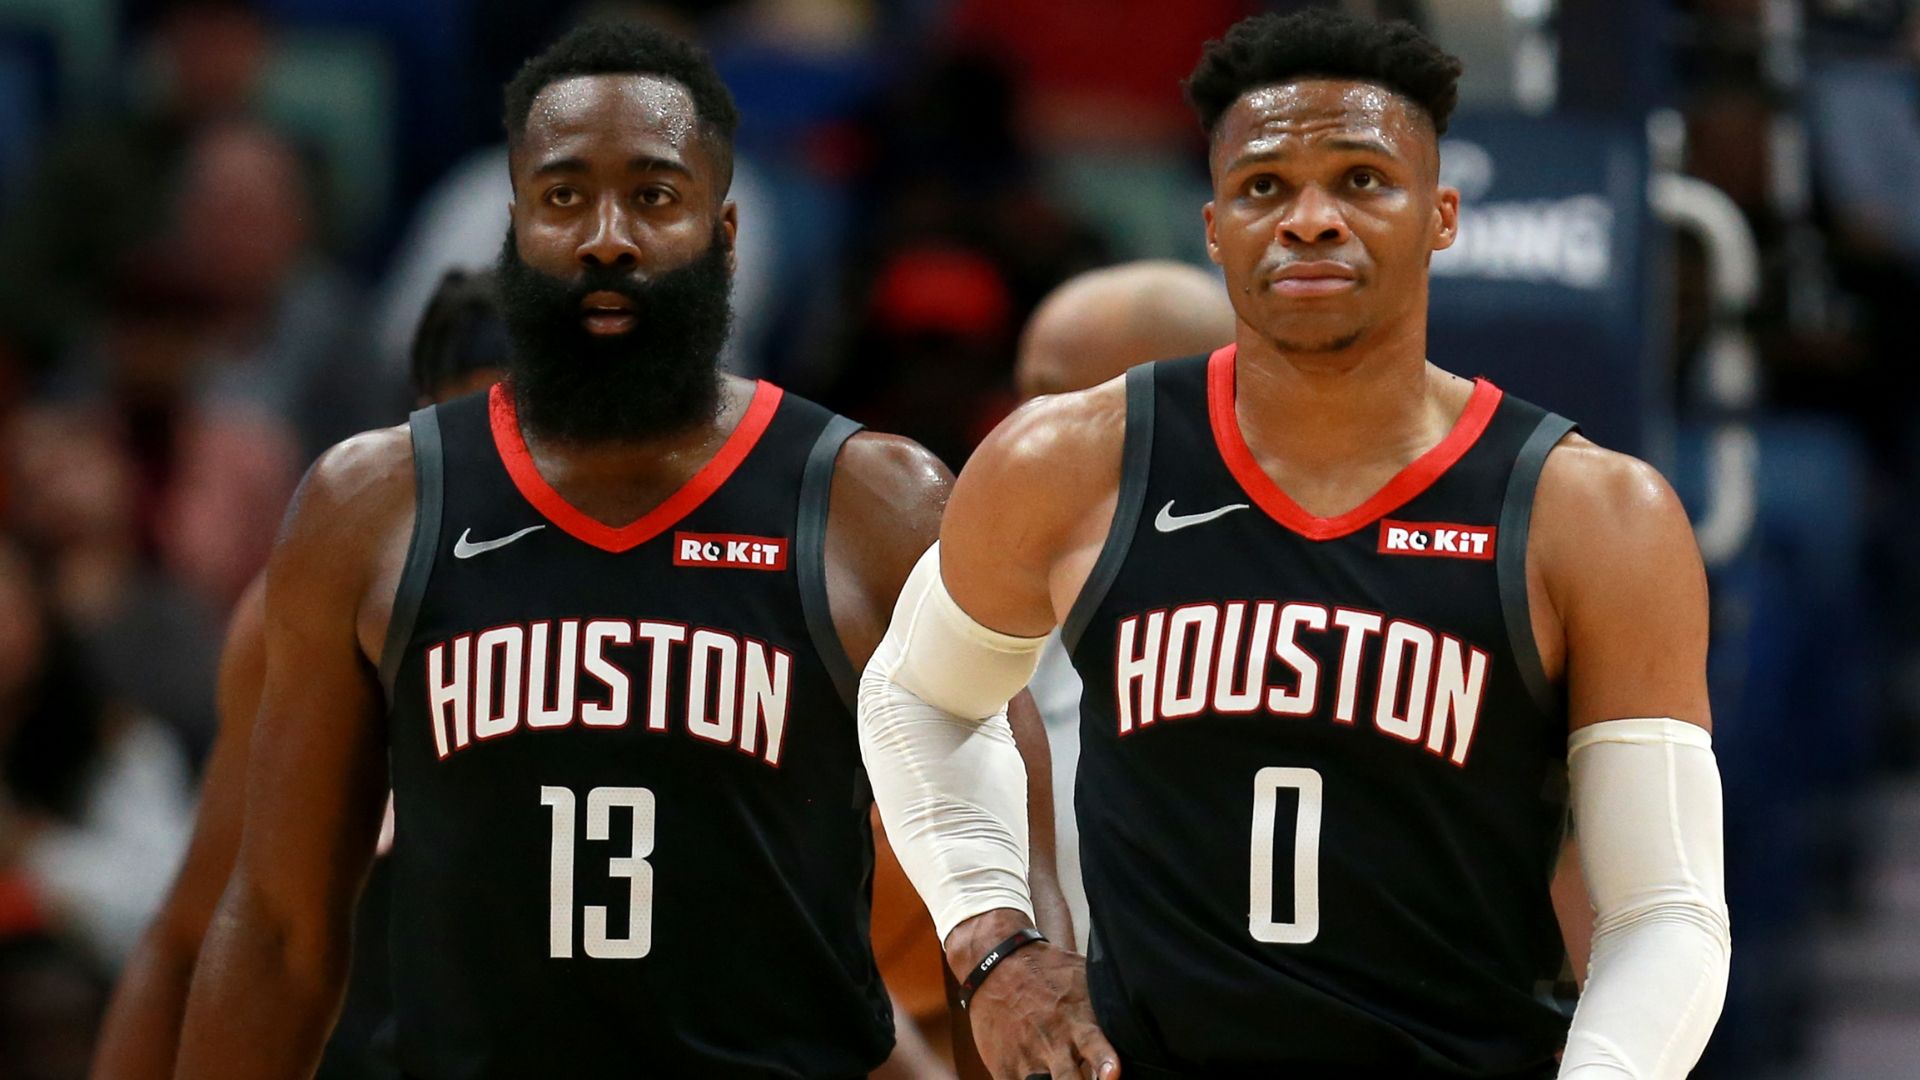 James Harden, Russell Westbrook combine for 62 points in Rockets